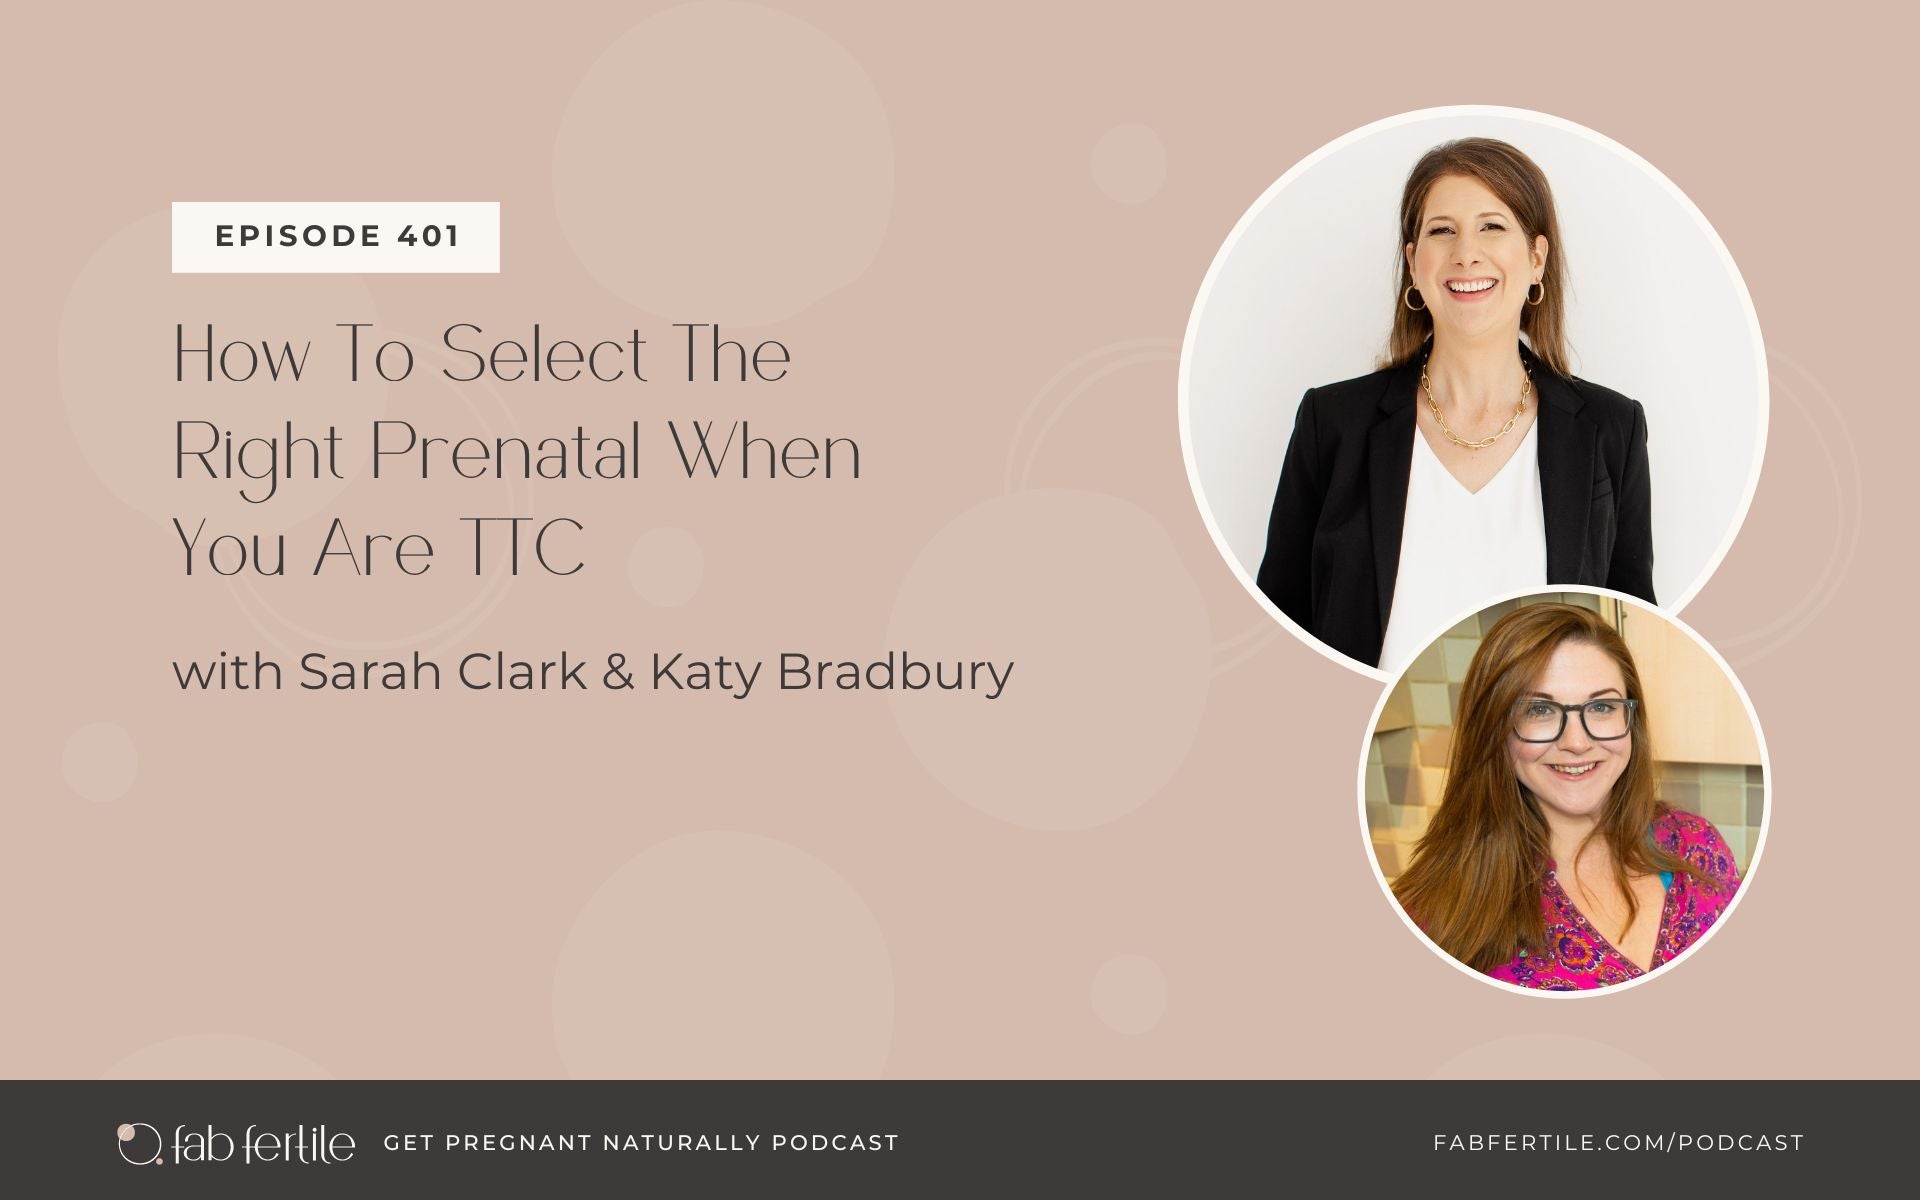 How To Select The Right Prenatal When You Are TTC